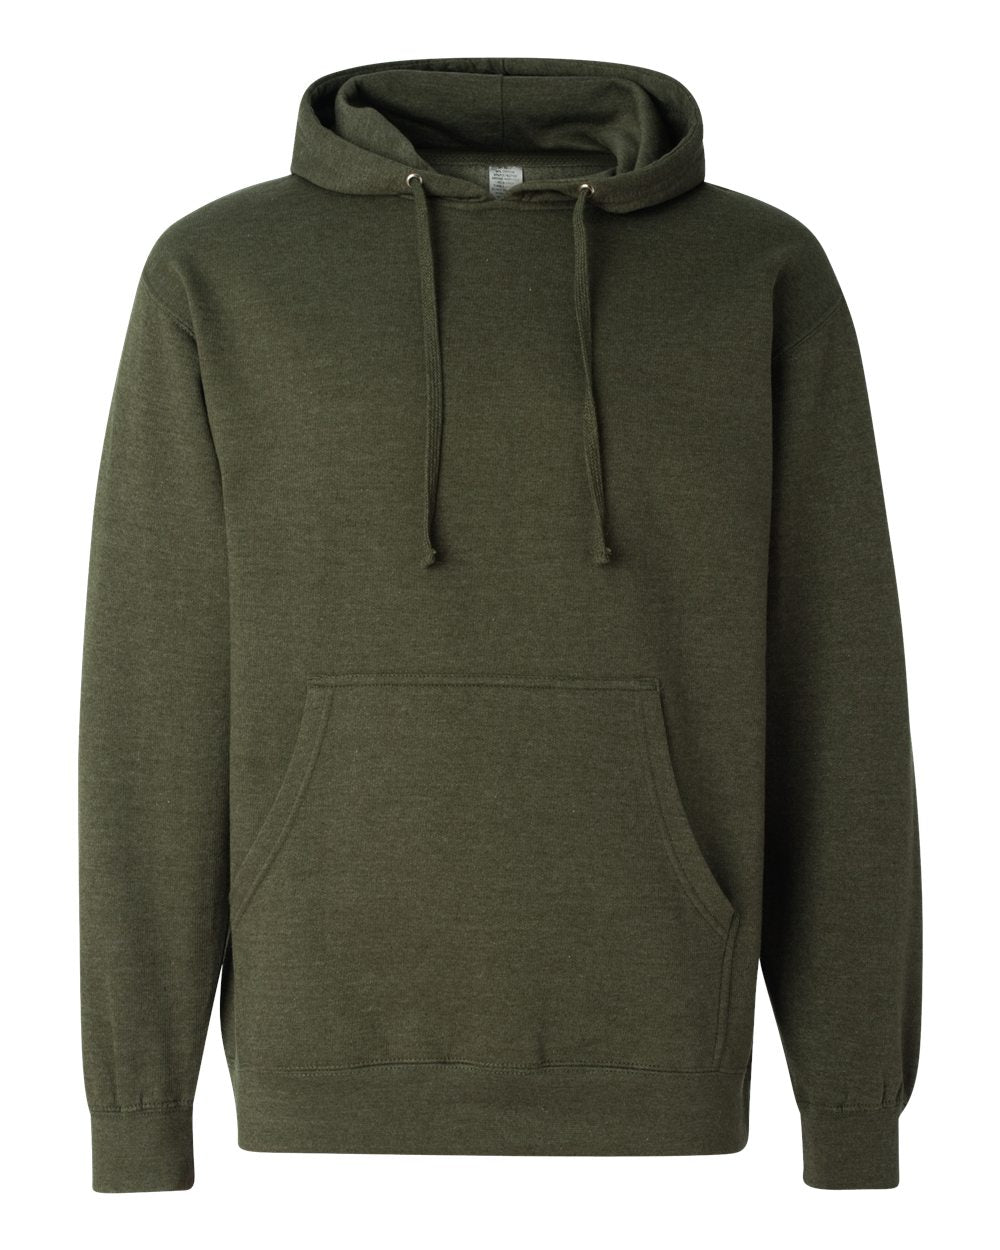 Independent Trading Co. Midweight Hooded Sweatshirt SS4500 #color_Army Heather